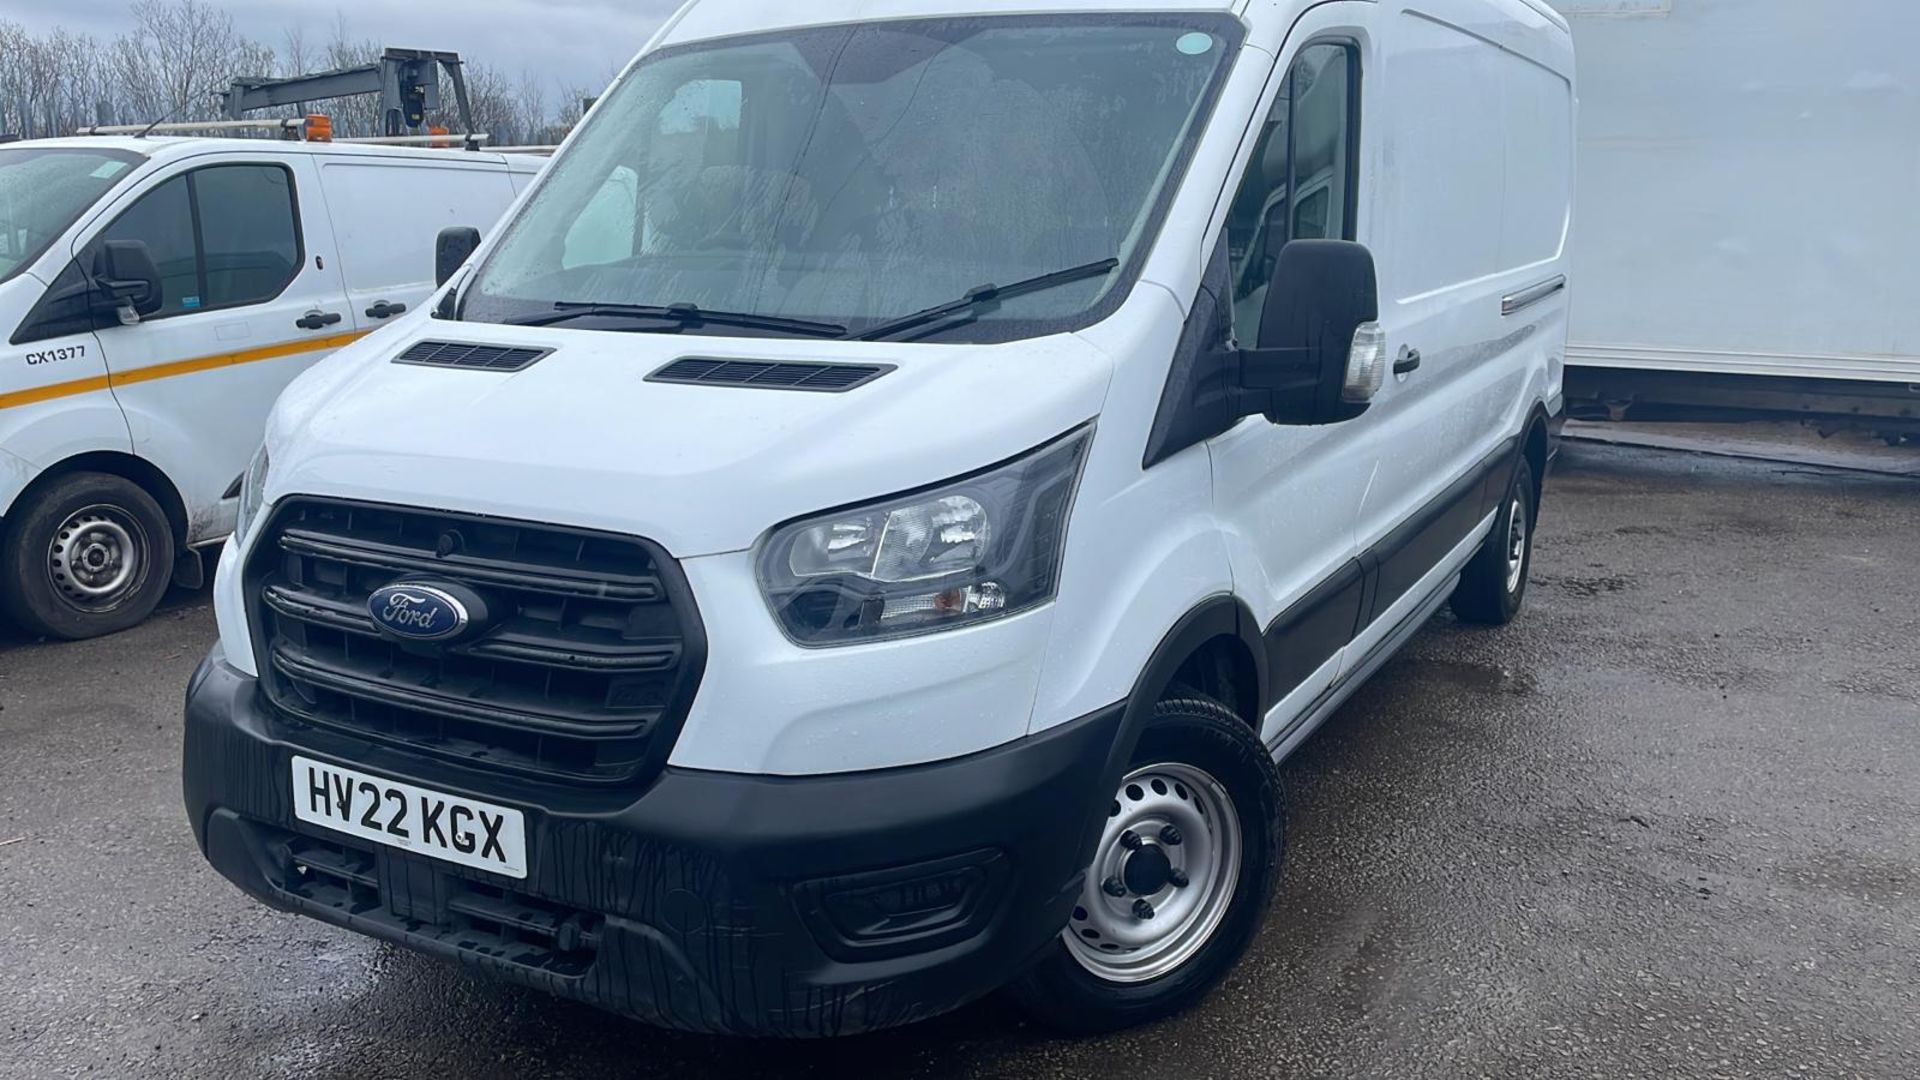 2022 22 PLATE FORD TRANSIT 350 LEADER ECO BLUE PANEL VAN - 24,186 WARRANTED MILES - FWD.